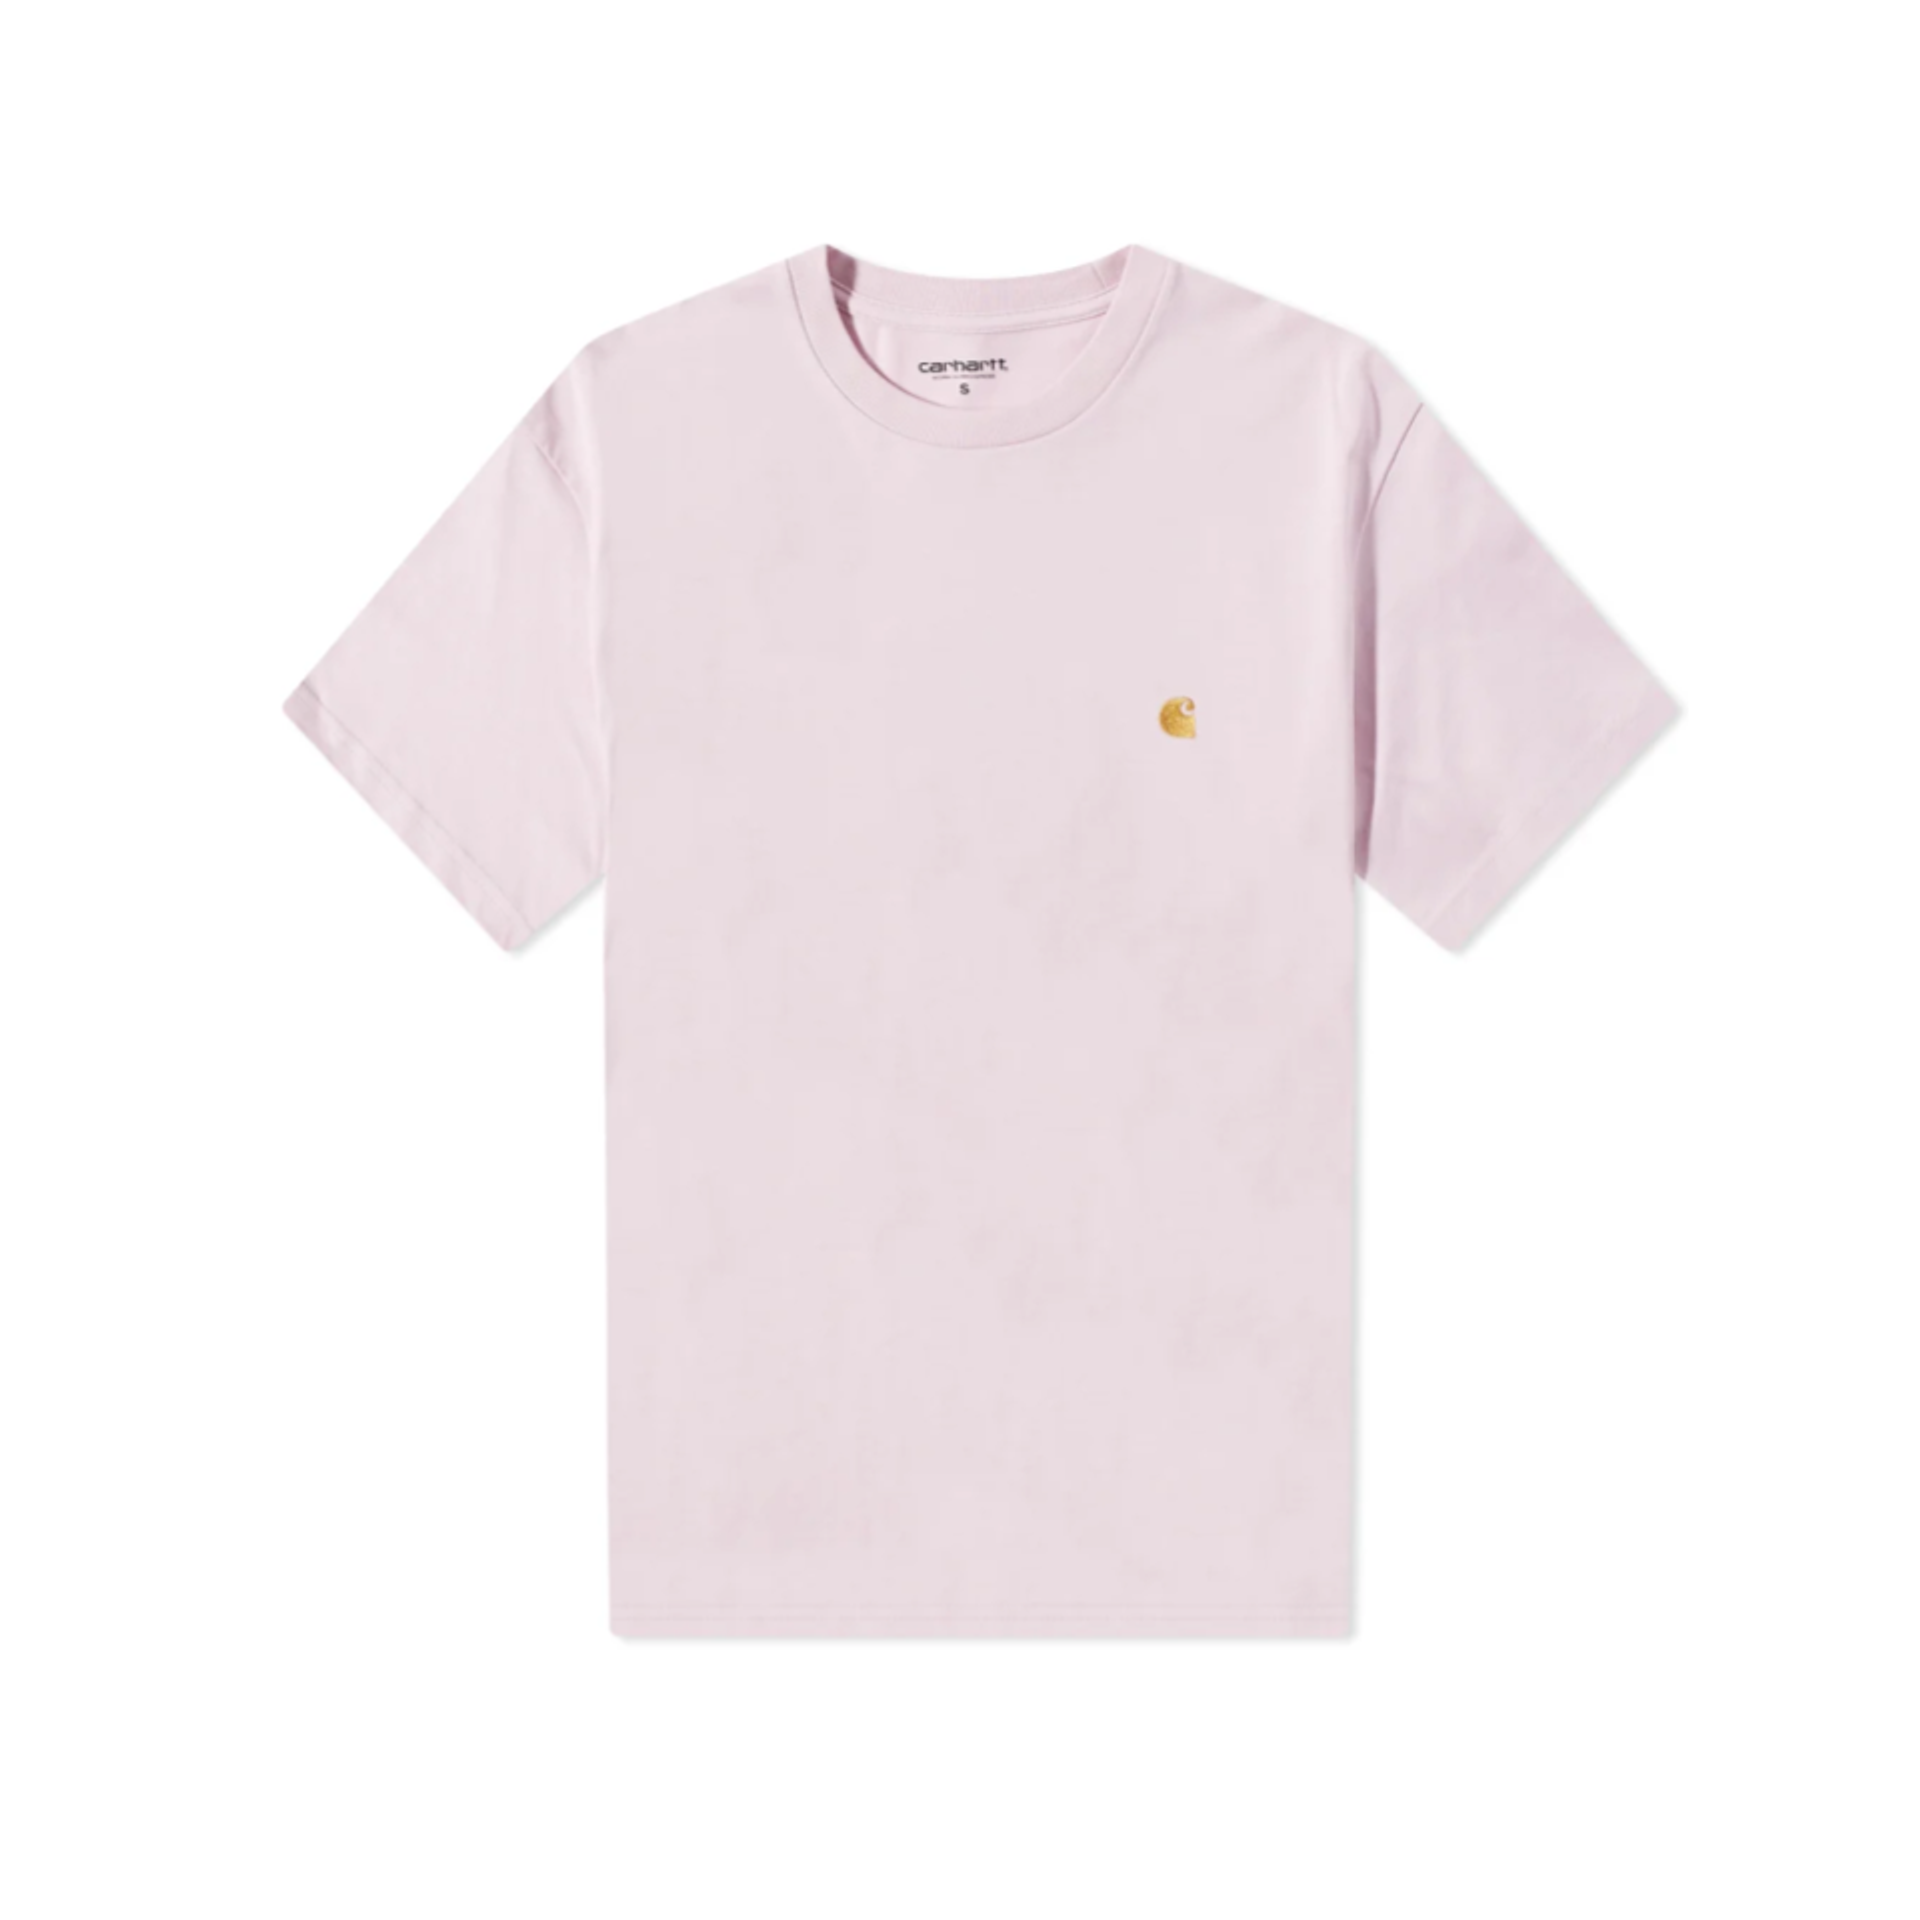 Carhartt WIP Chase S/S Tee 'Pale Quartz/Gold'